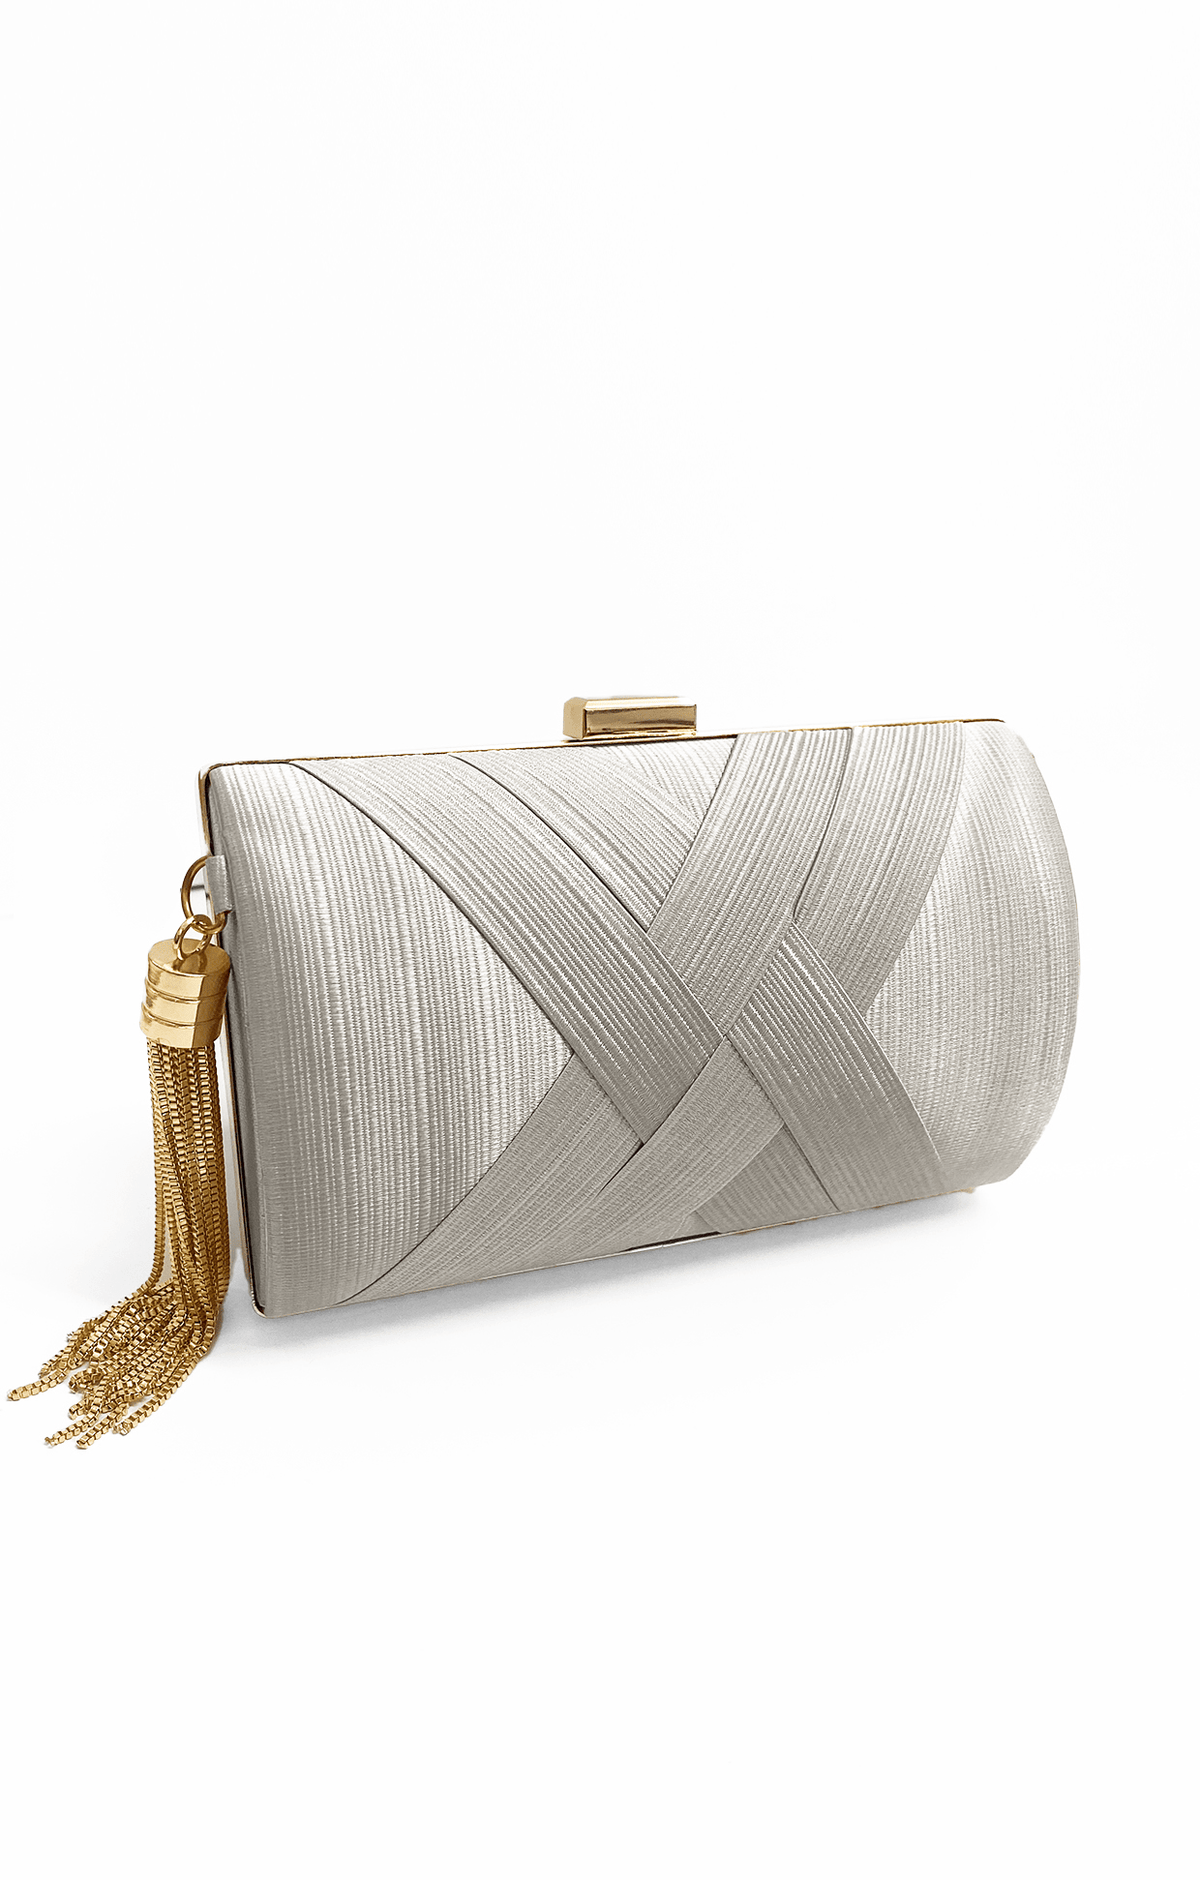 ACCESSORIES Bags Clutches One Size / Neutral DEANNA EVENING BAG IN SILVER